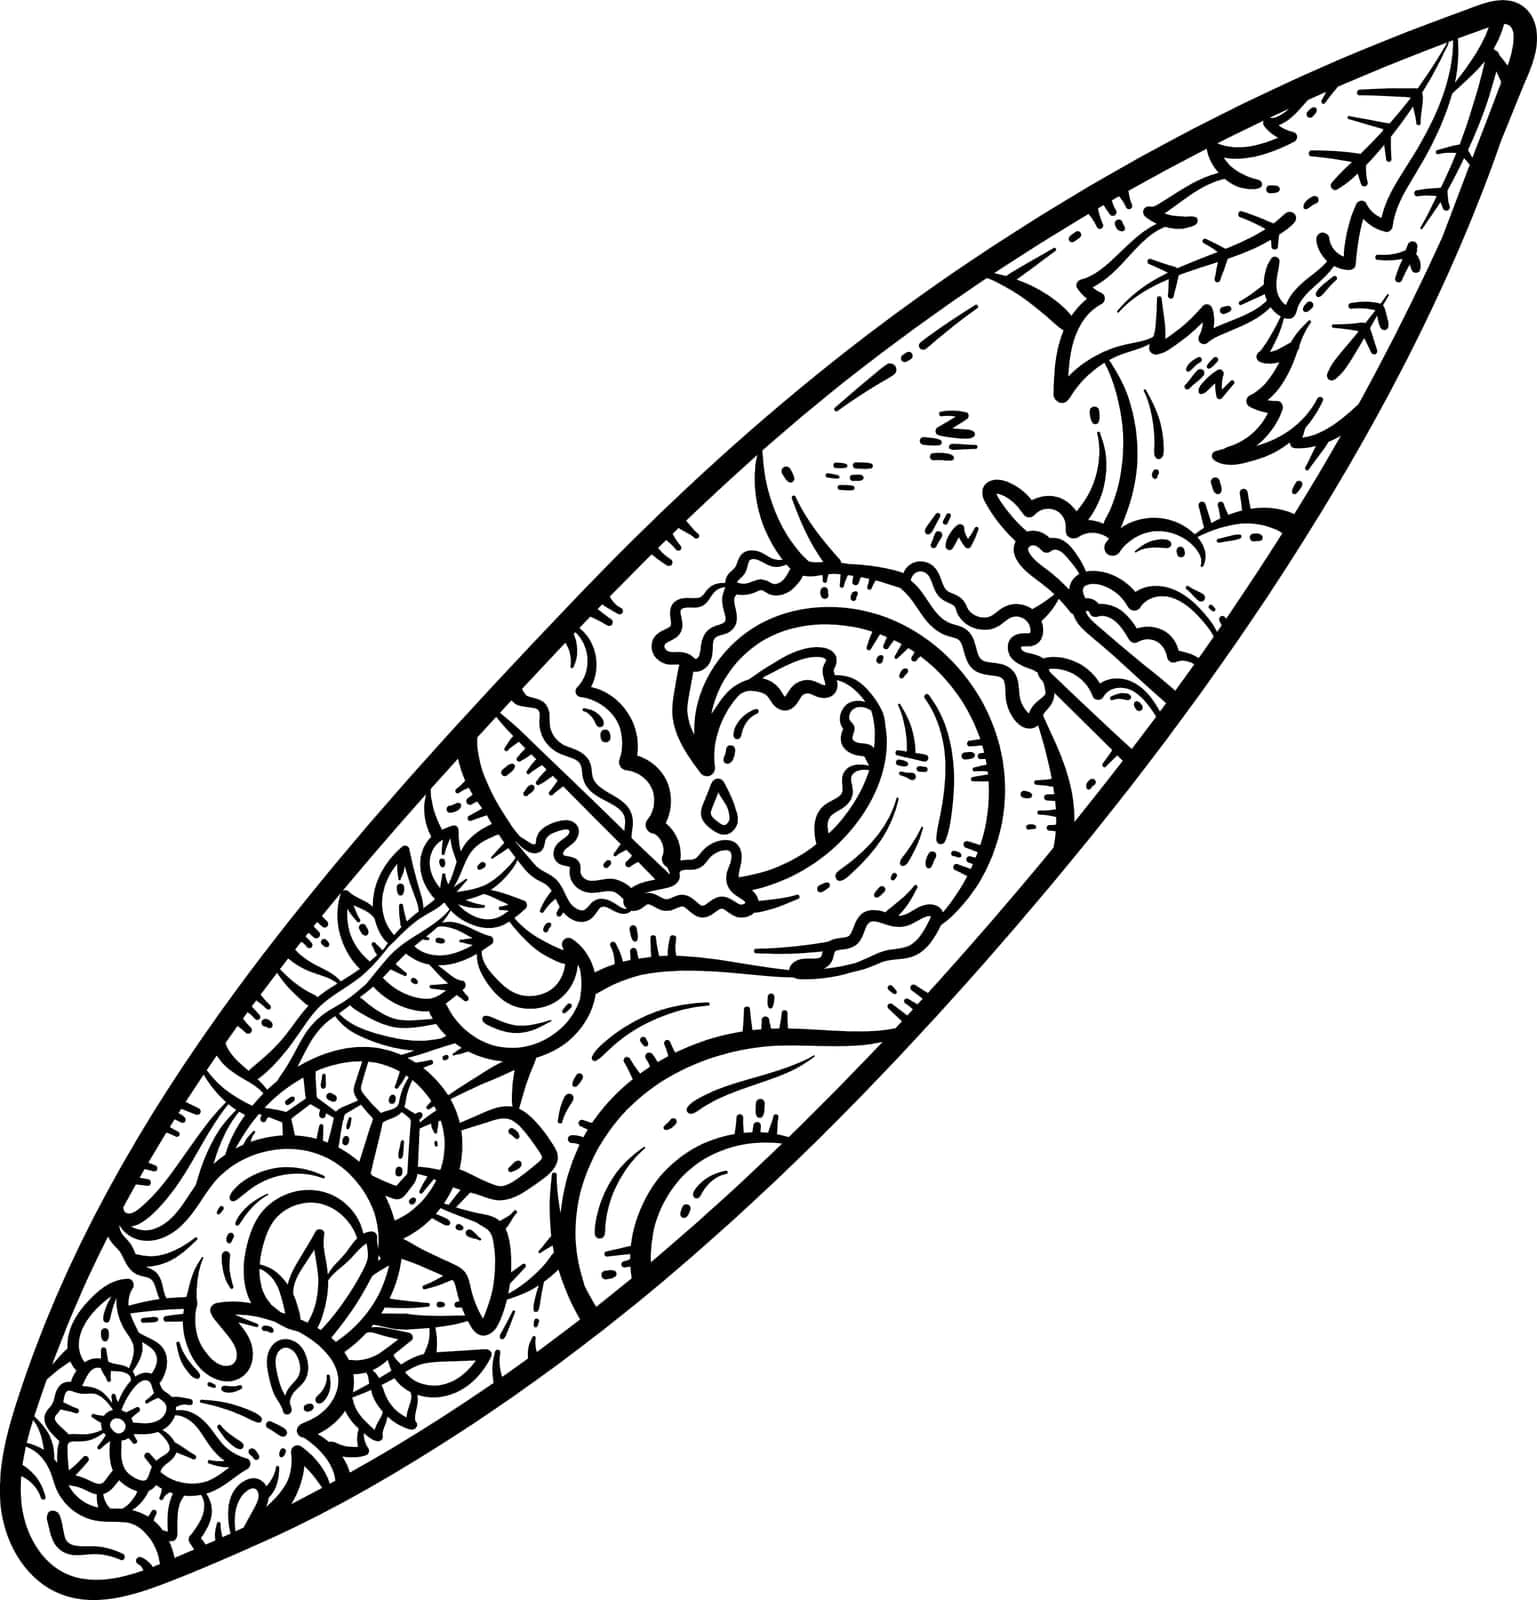 A cute and beautiful coloring page of a Surfing Board. Provides hours of coloring fun for adults.